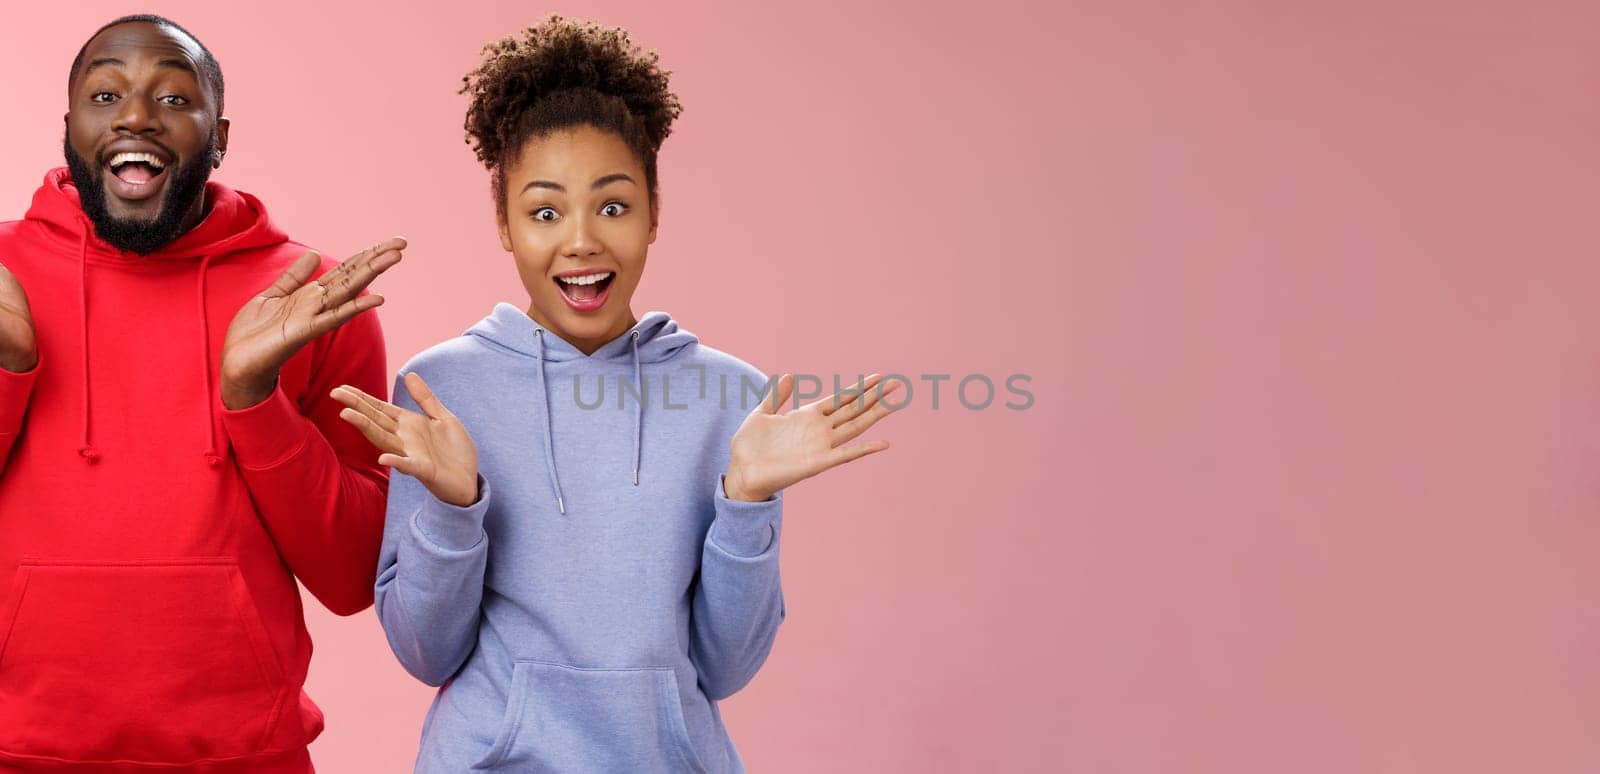 Impressed happy thrilled young pair african man woman relationship clapping palms joyfully surprised wide eyes joyfully greeting friends inviting come in hospitable, standing pink background.